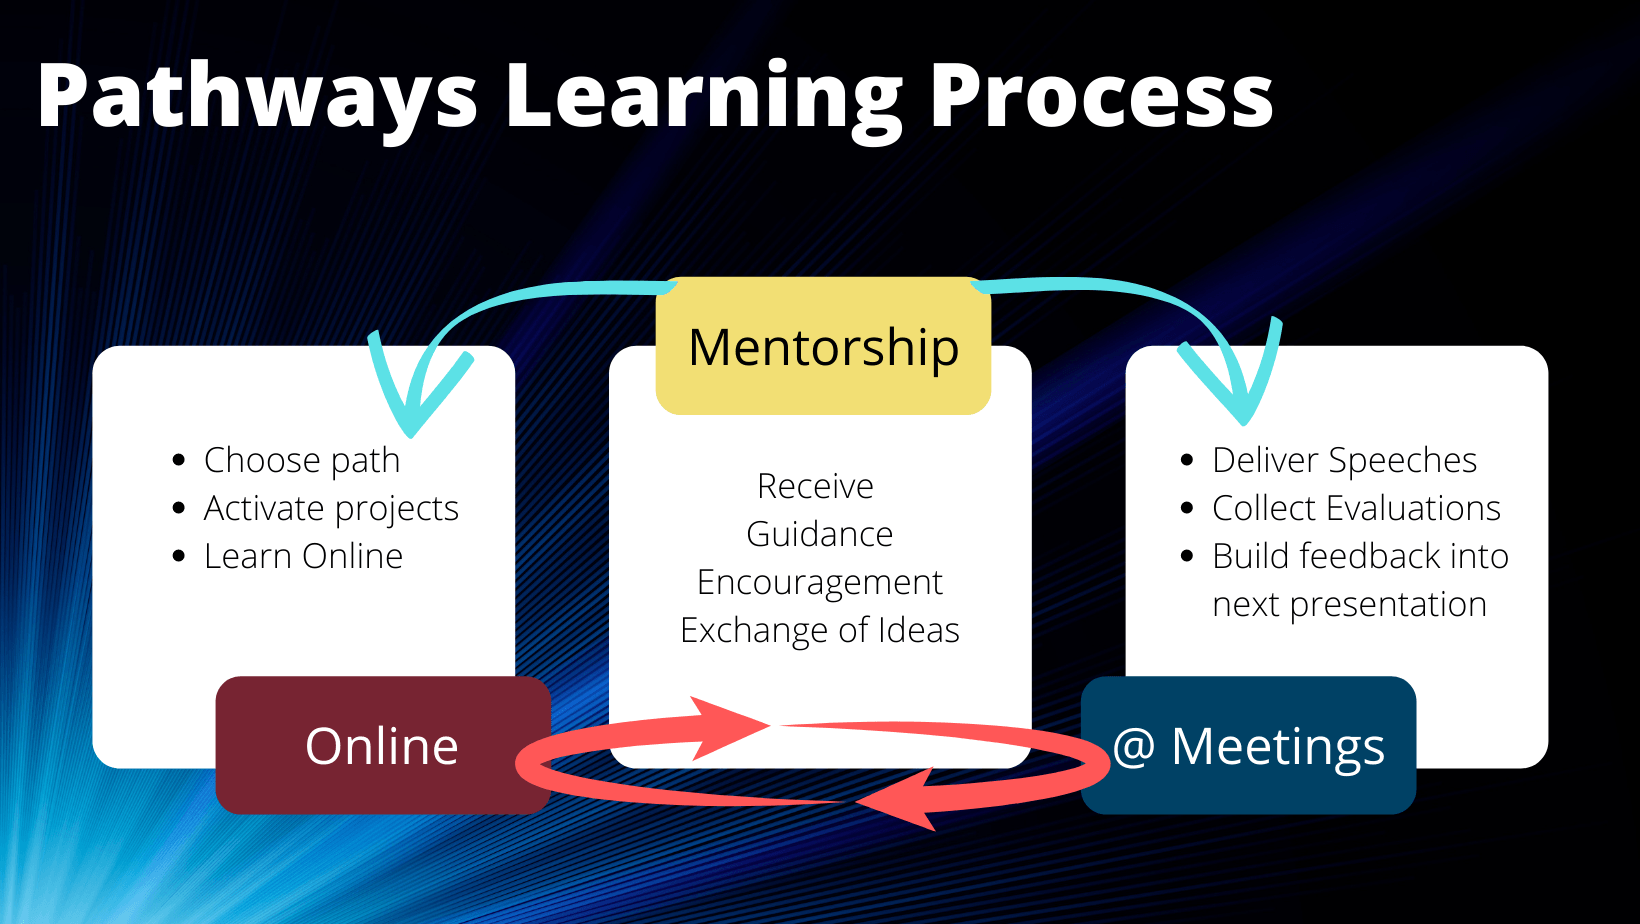 Pathways learning process flow graphic